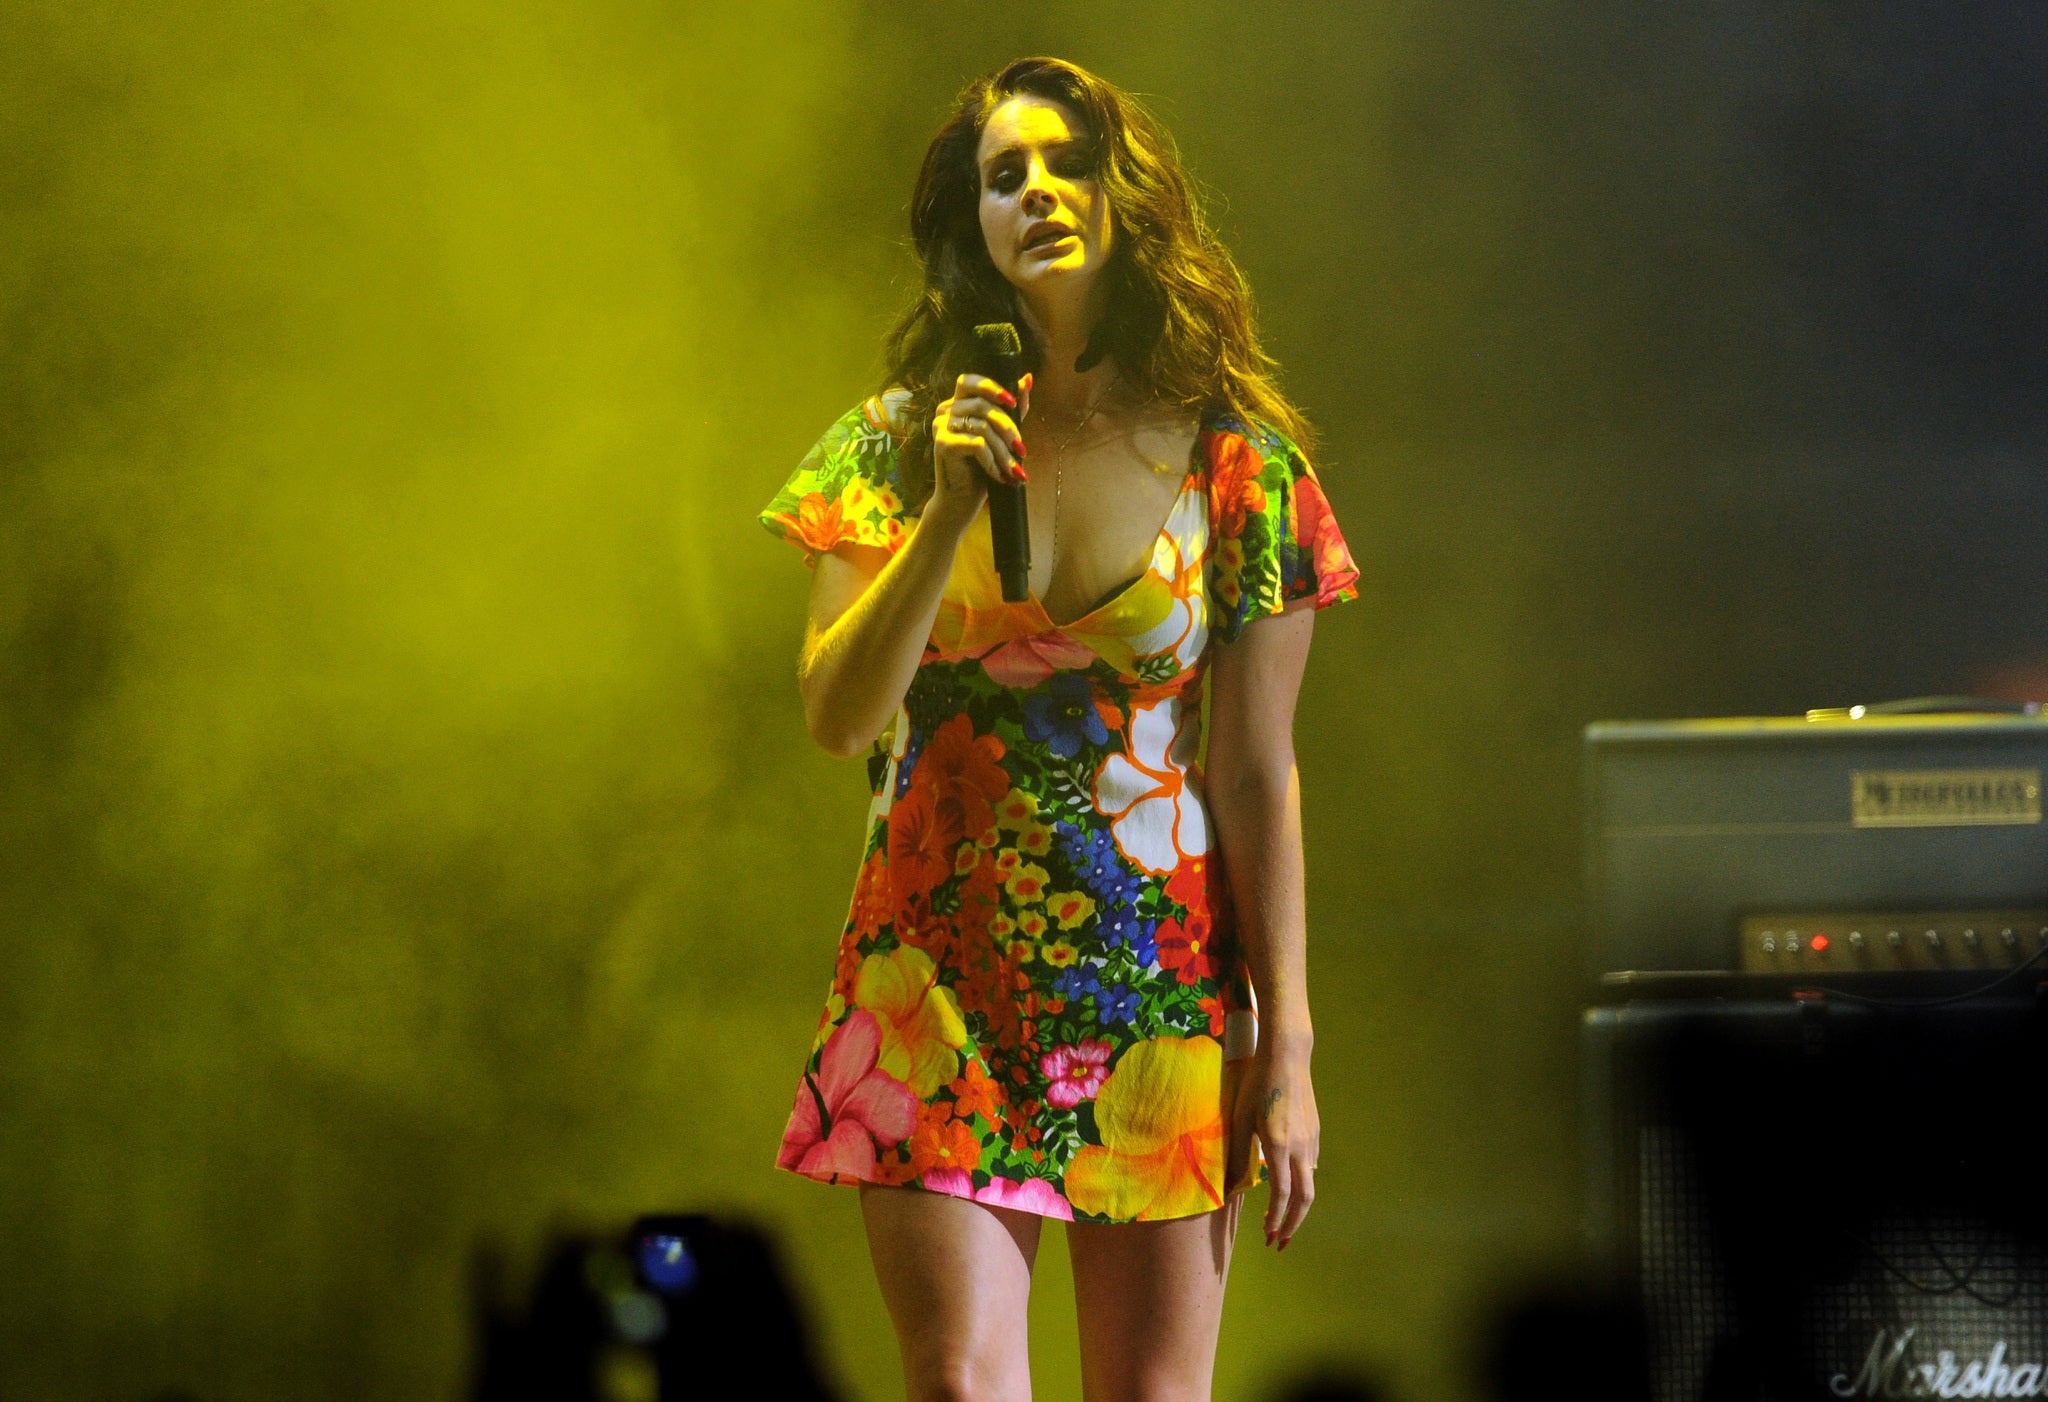 Del Rey argued that 'music is universal and should be used to bring us together'